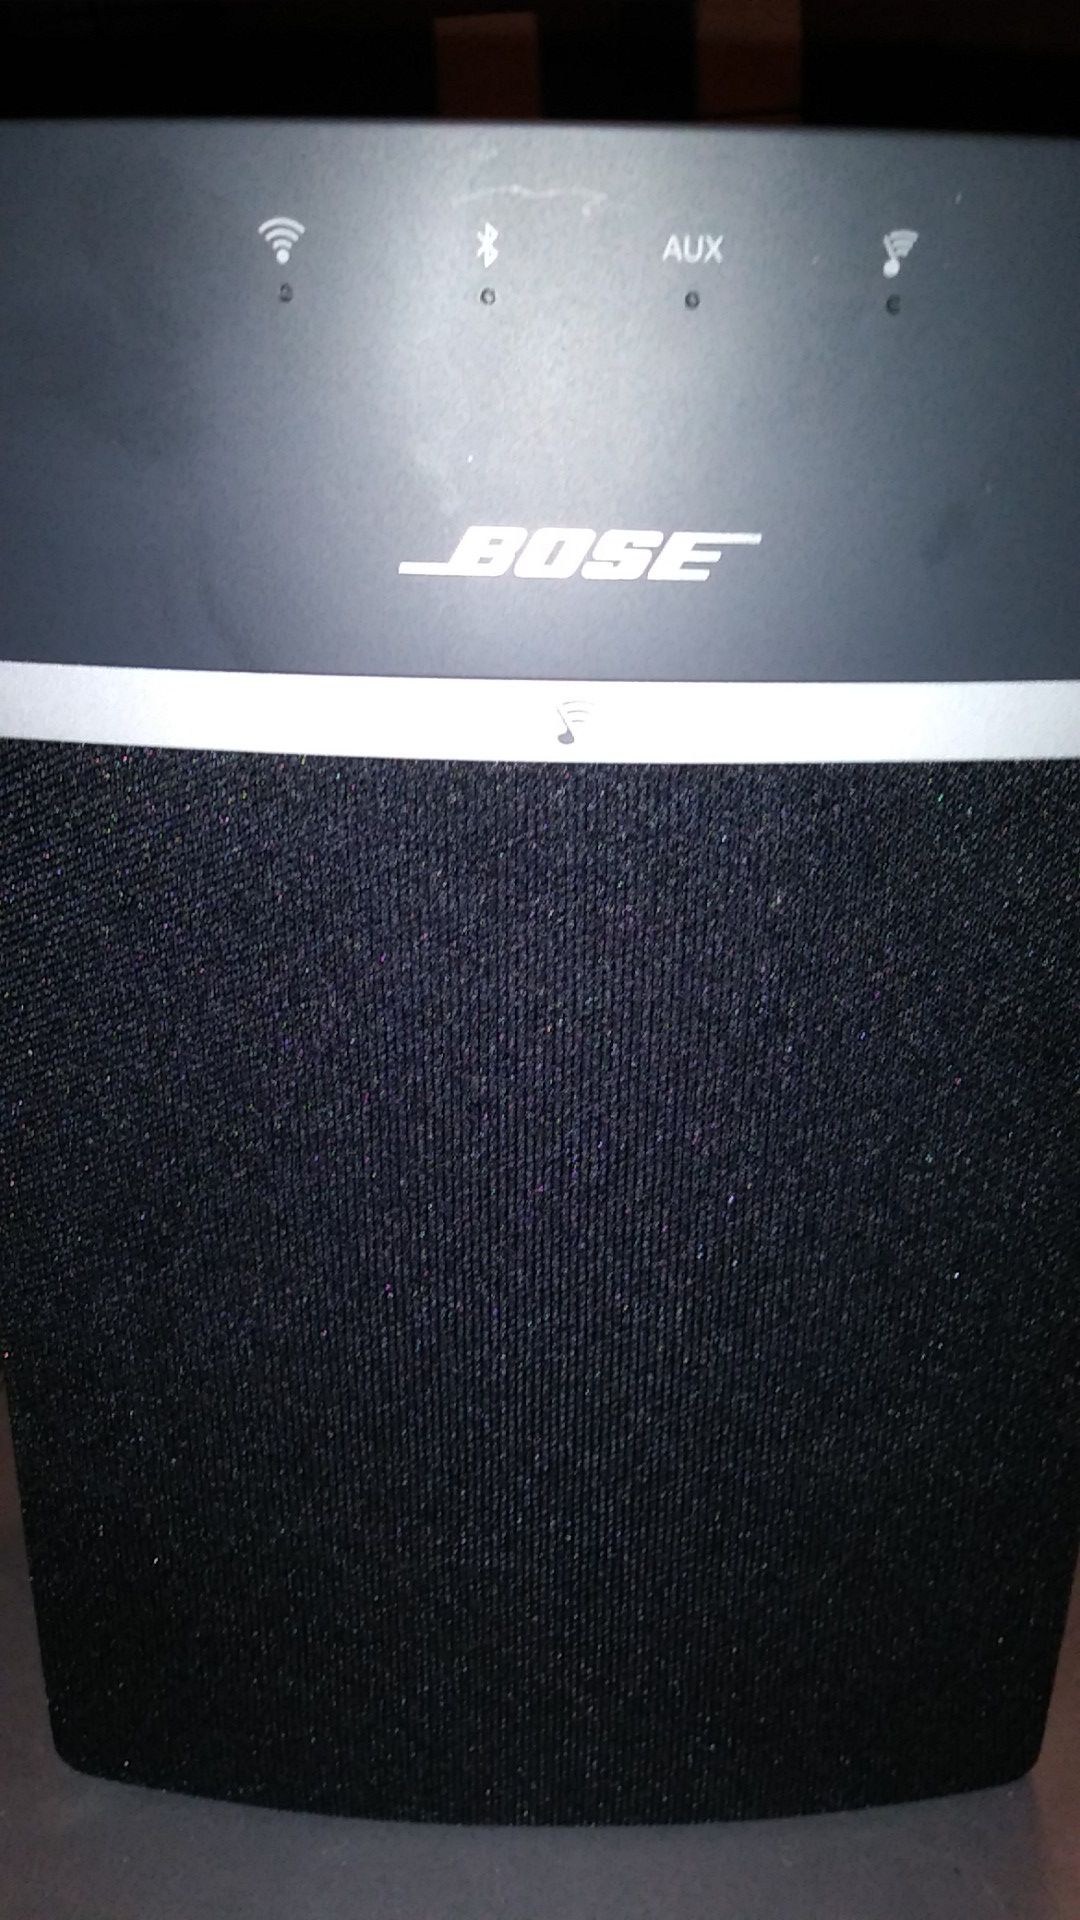 BOSE sound touch 10 wireless music system